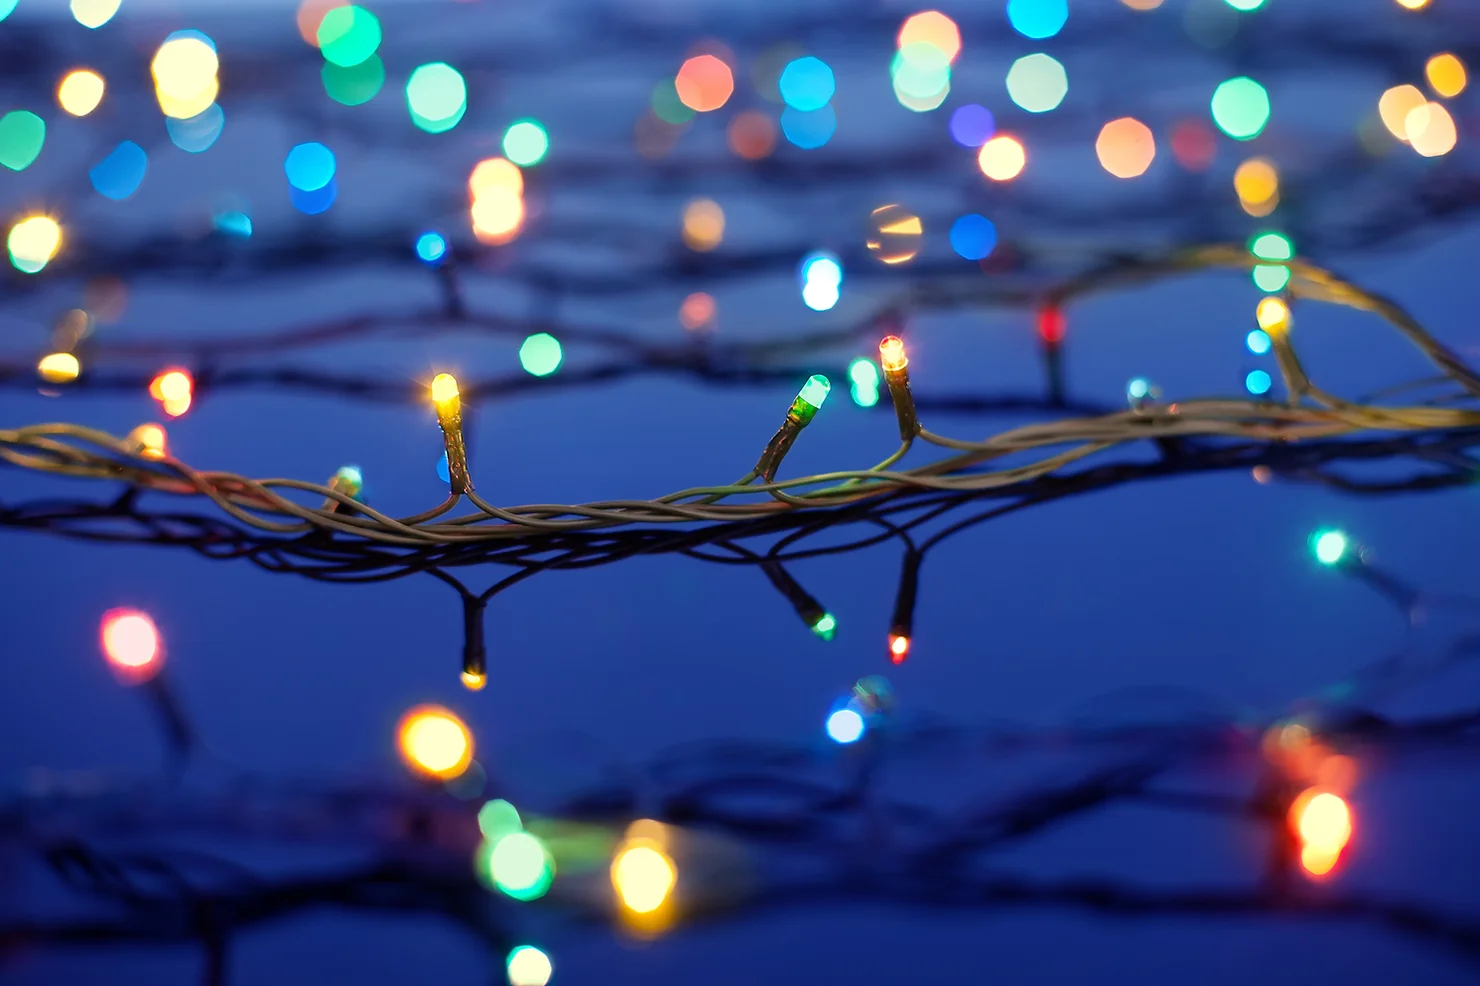 This image shows a close-up of colorful twinkling lights spread out against a blurry blue background, giving a festive or decorative atmosphere.